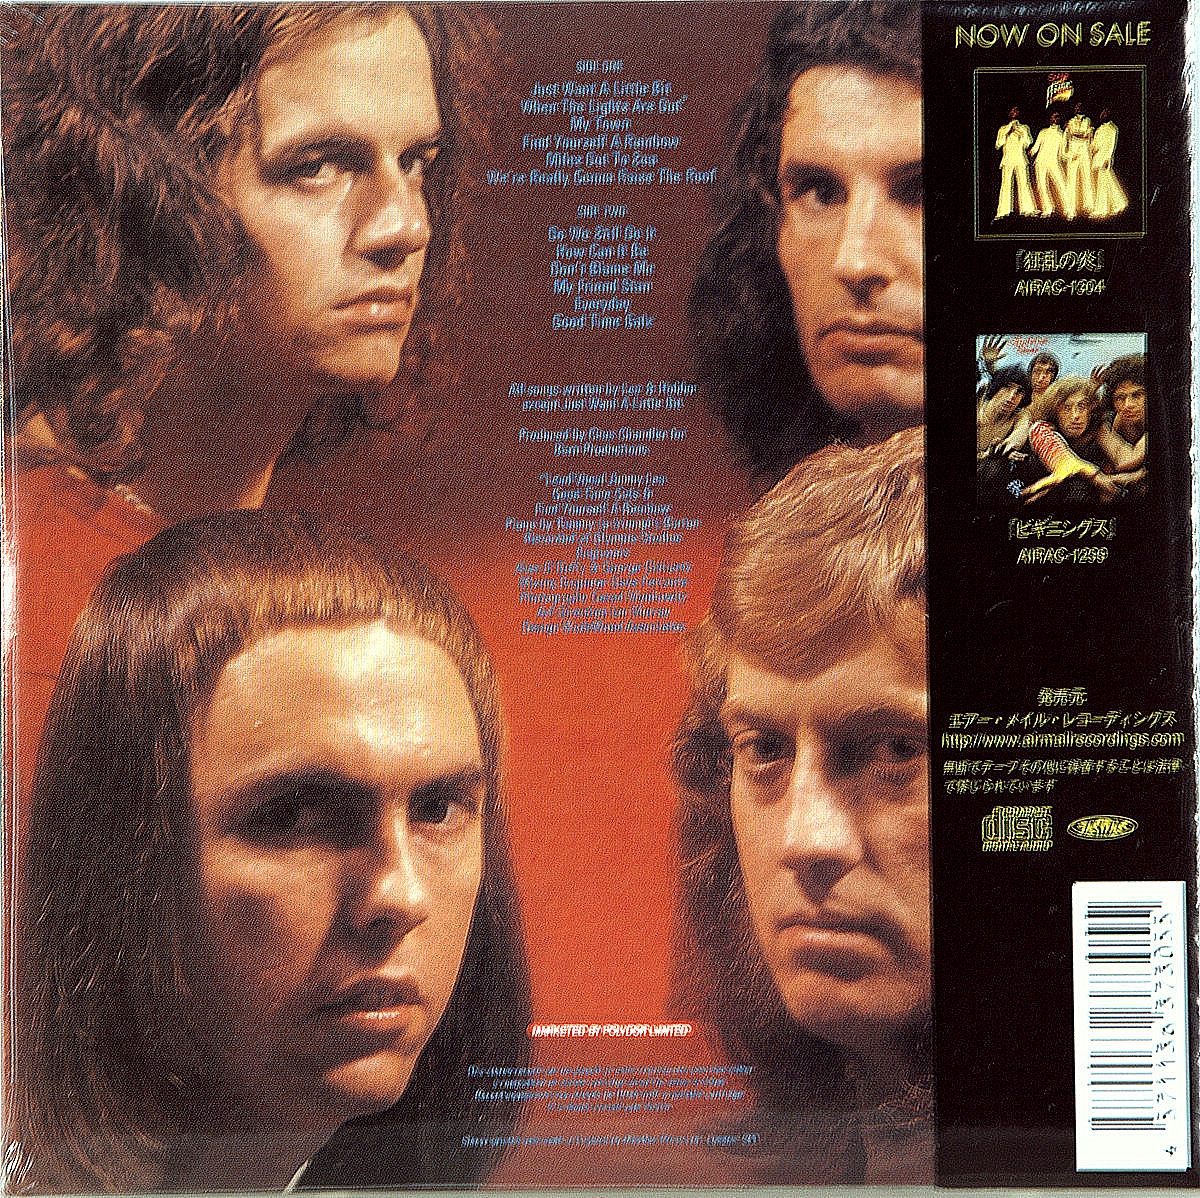 Old new borrowed. Slade old New Borrowed and Blue 1974. Slade old New Borrowed and Blue 1974 обложка. Slade old New Borrowed and Blue 1974 (Vinyl LP). Album Slade old New Borrowed and Blue.